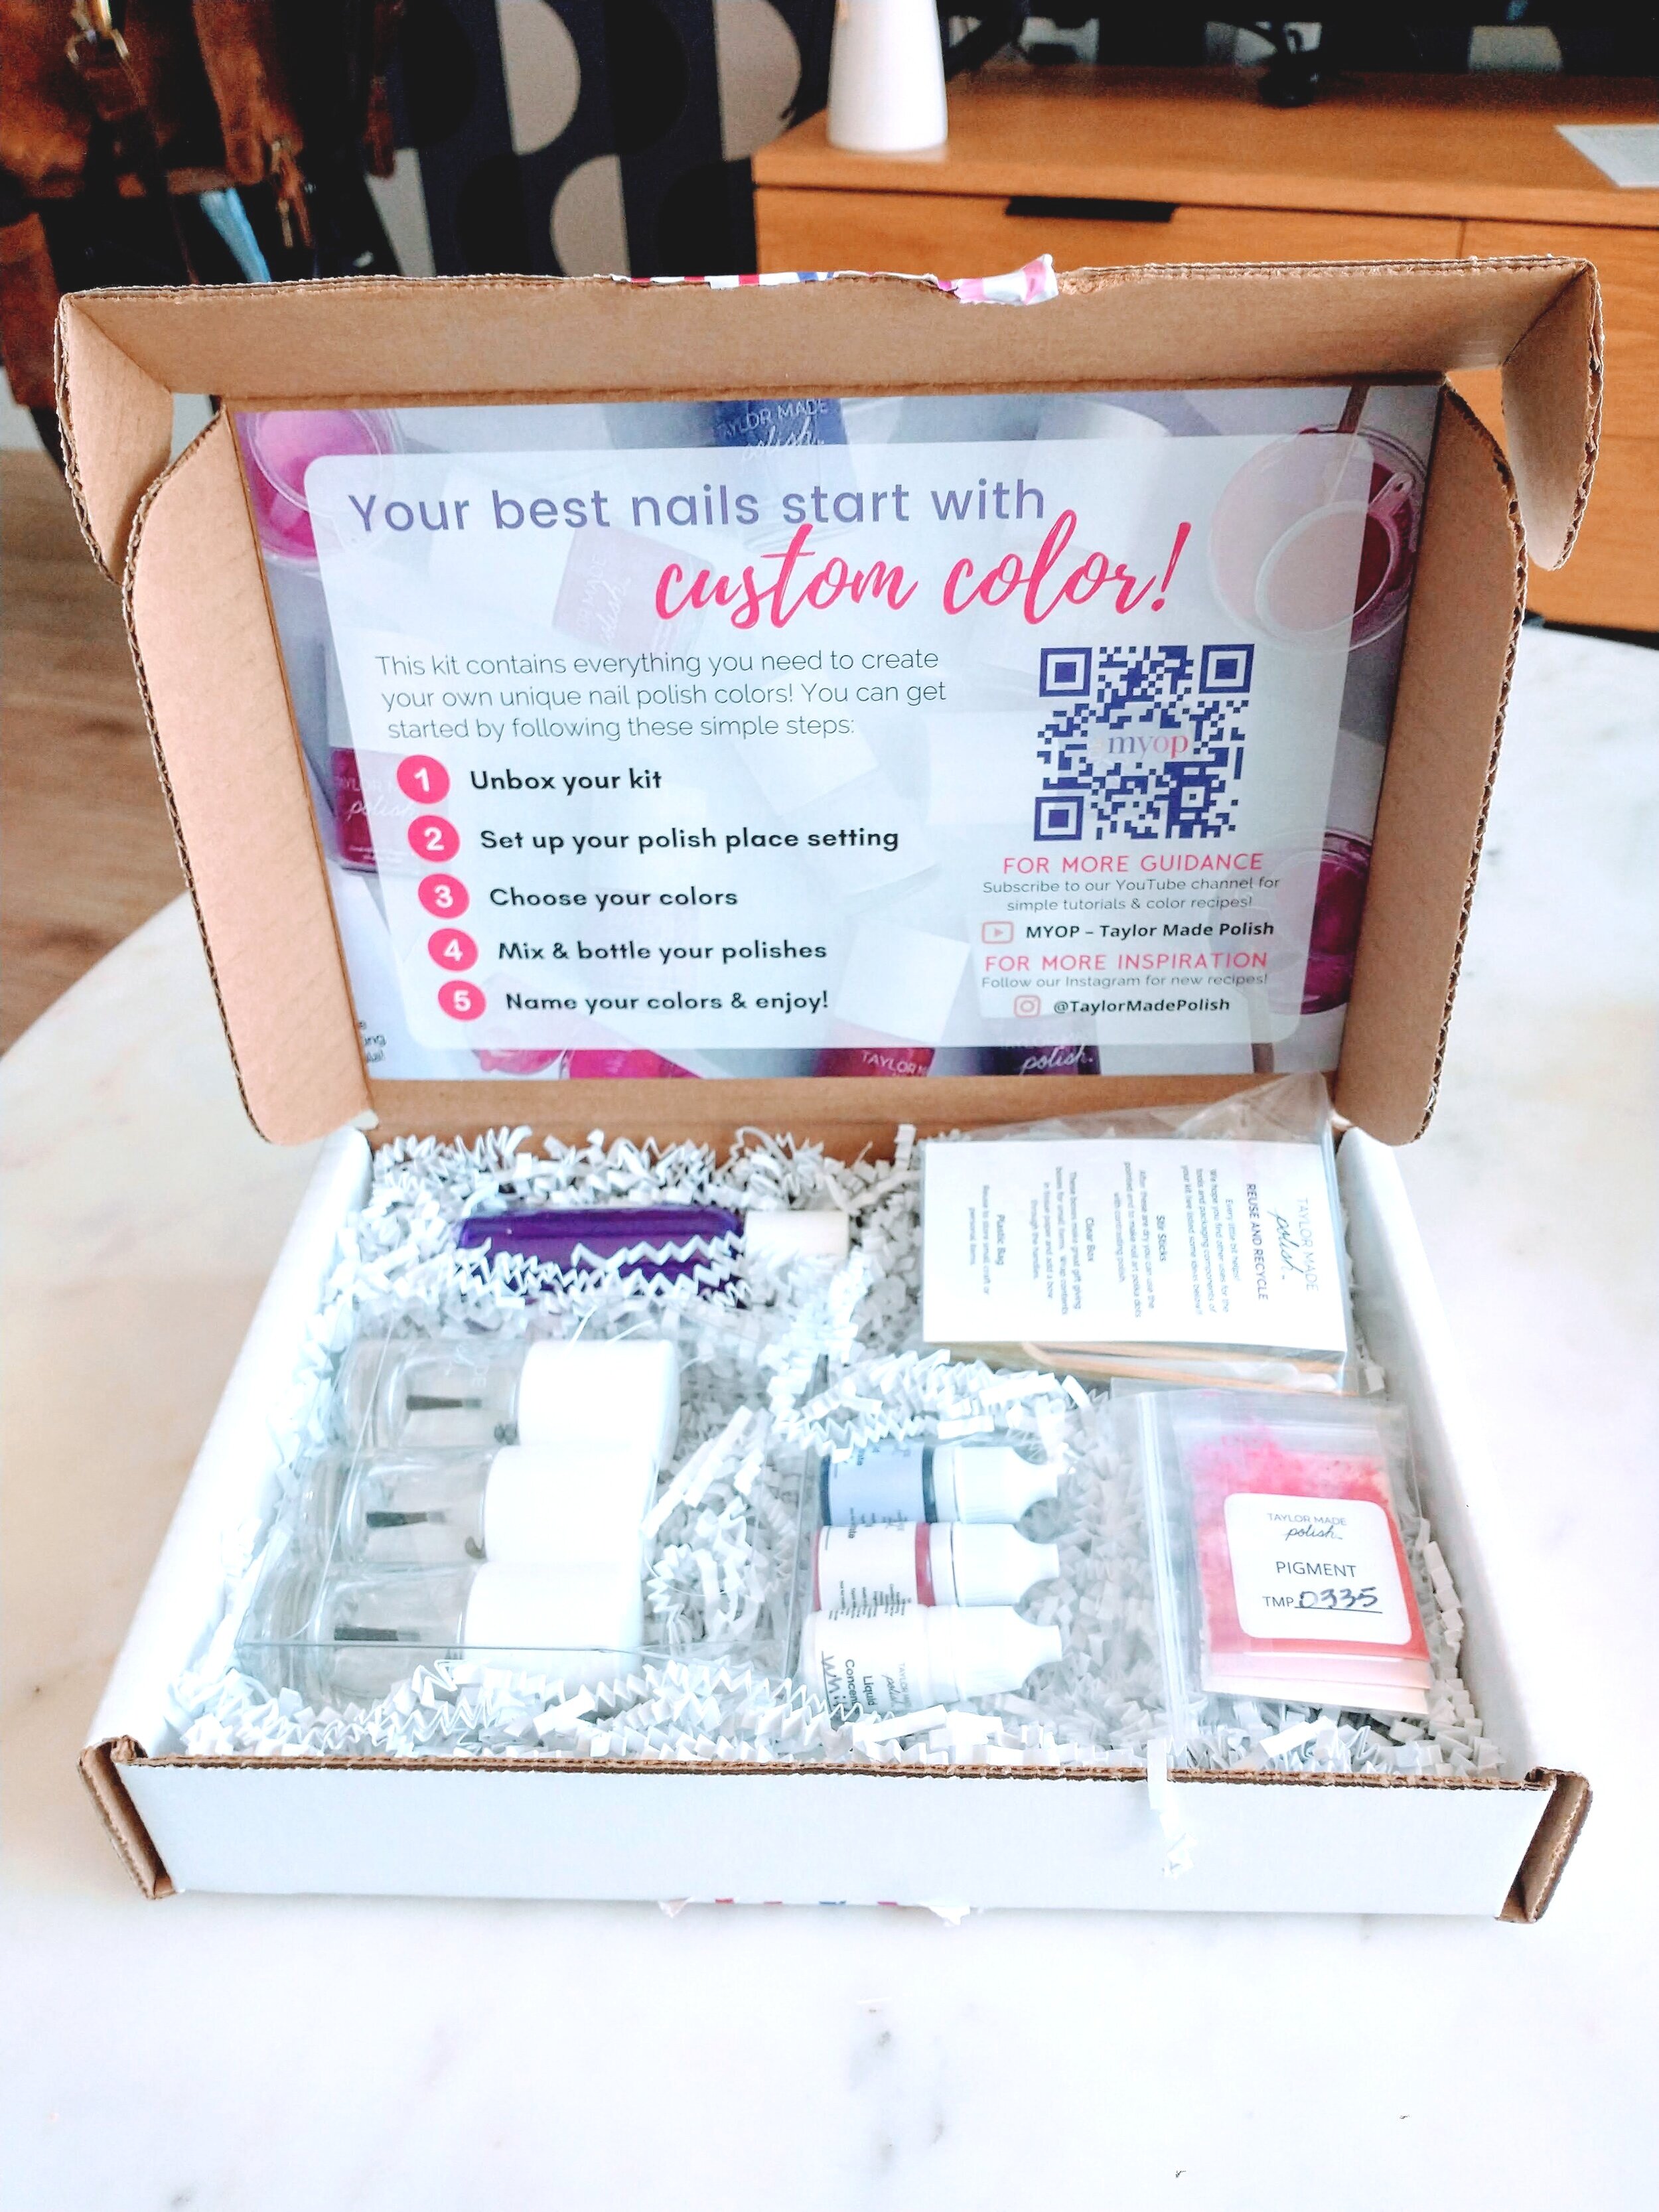 Meet Taylor Made: Truly Personalized Nail Care with a Personal Touch